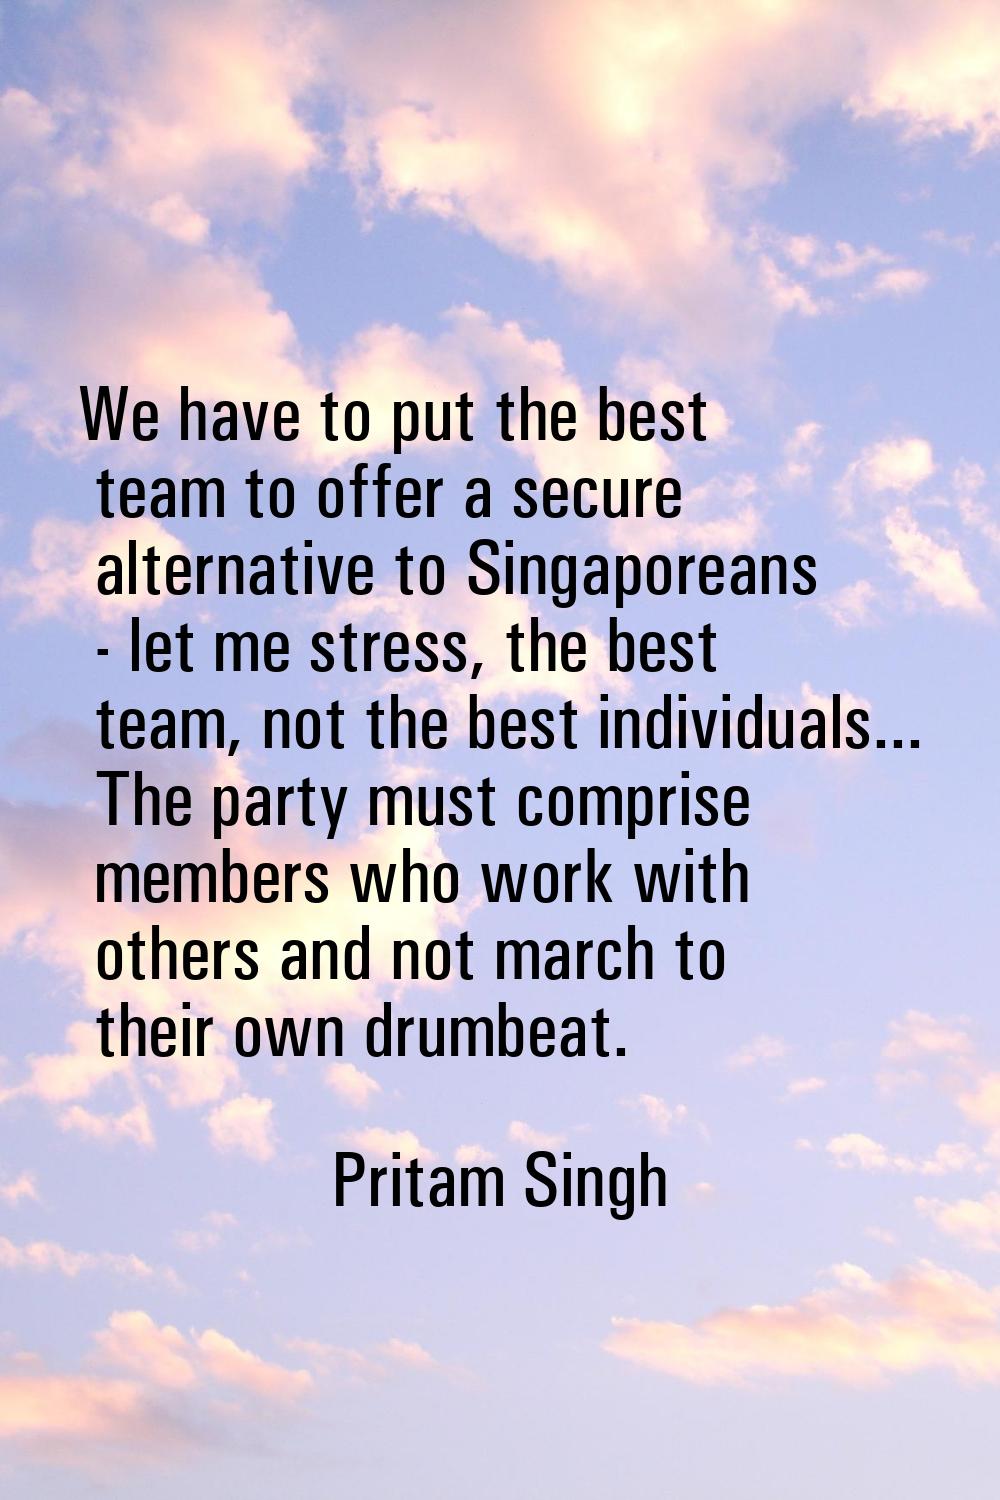 We have to put the best team to offer a secure alternative to Singaporeans - let me stress, the bes